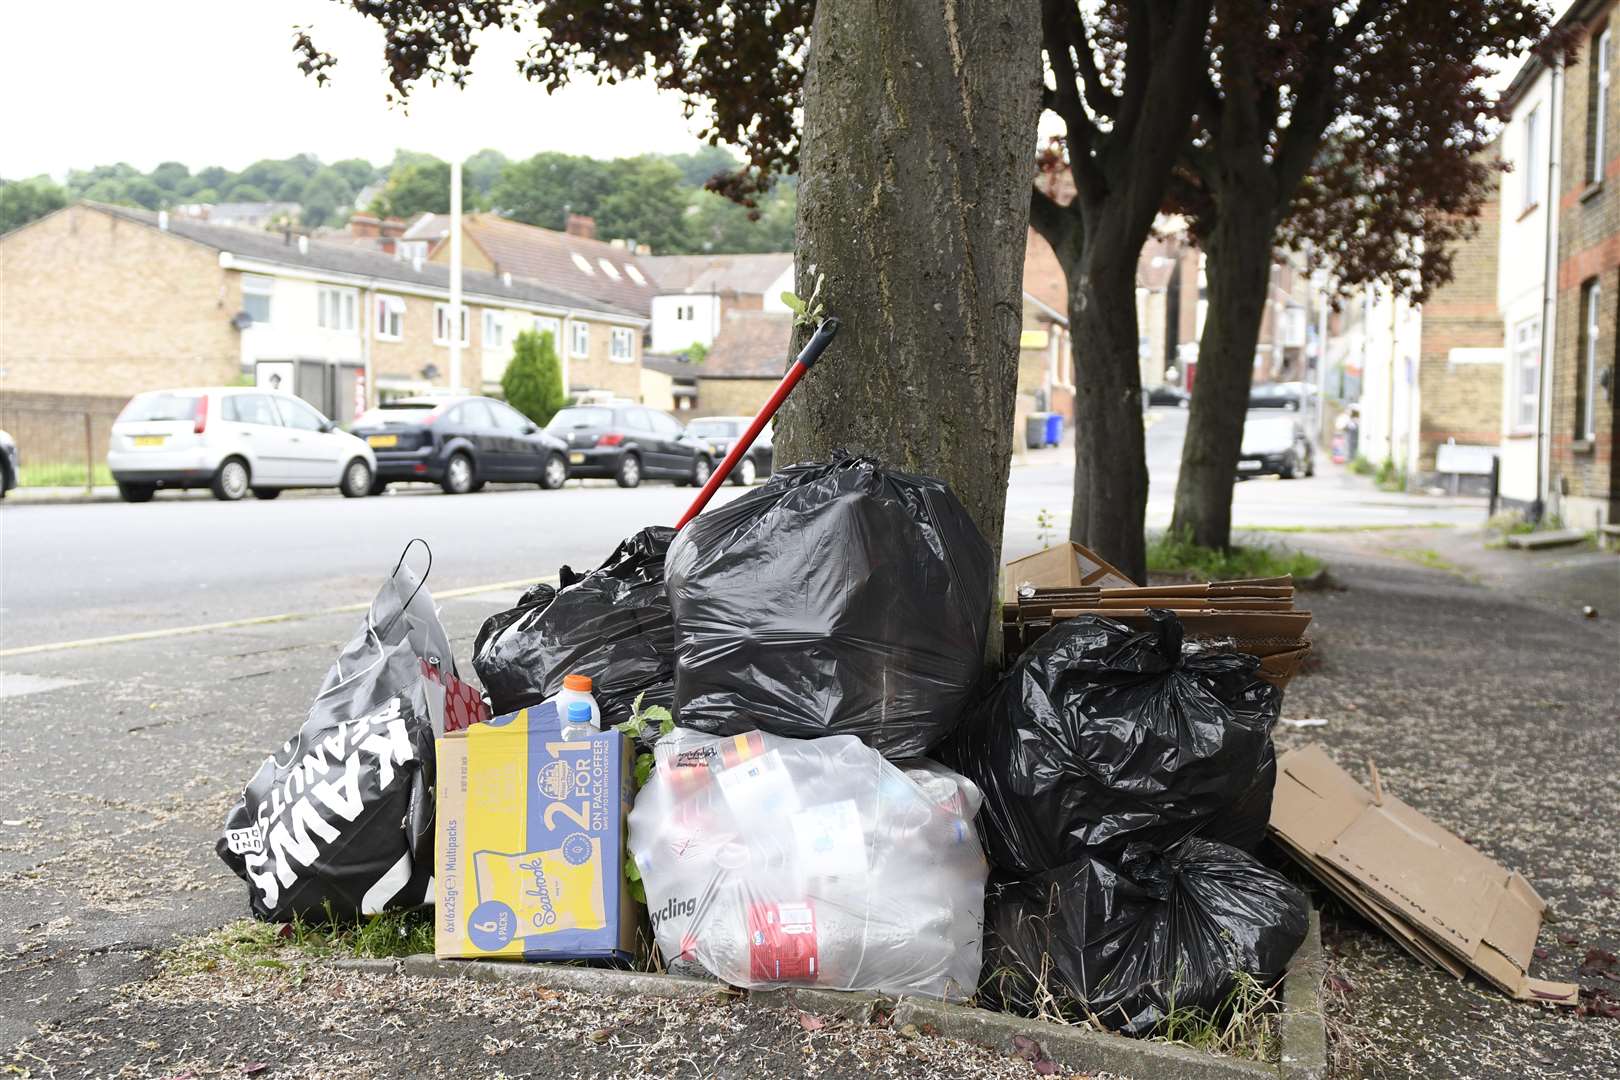 Litter in the streets of Chatham.Picture: Barry Goodwin (2388519)